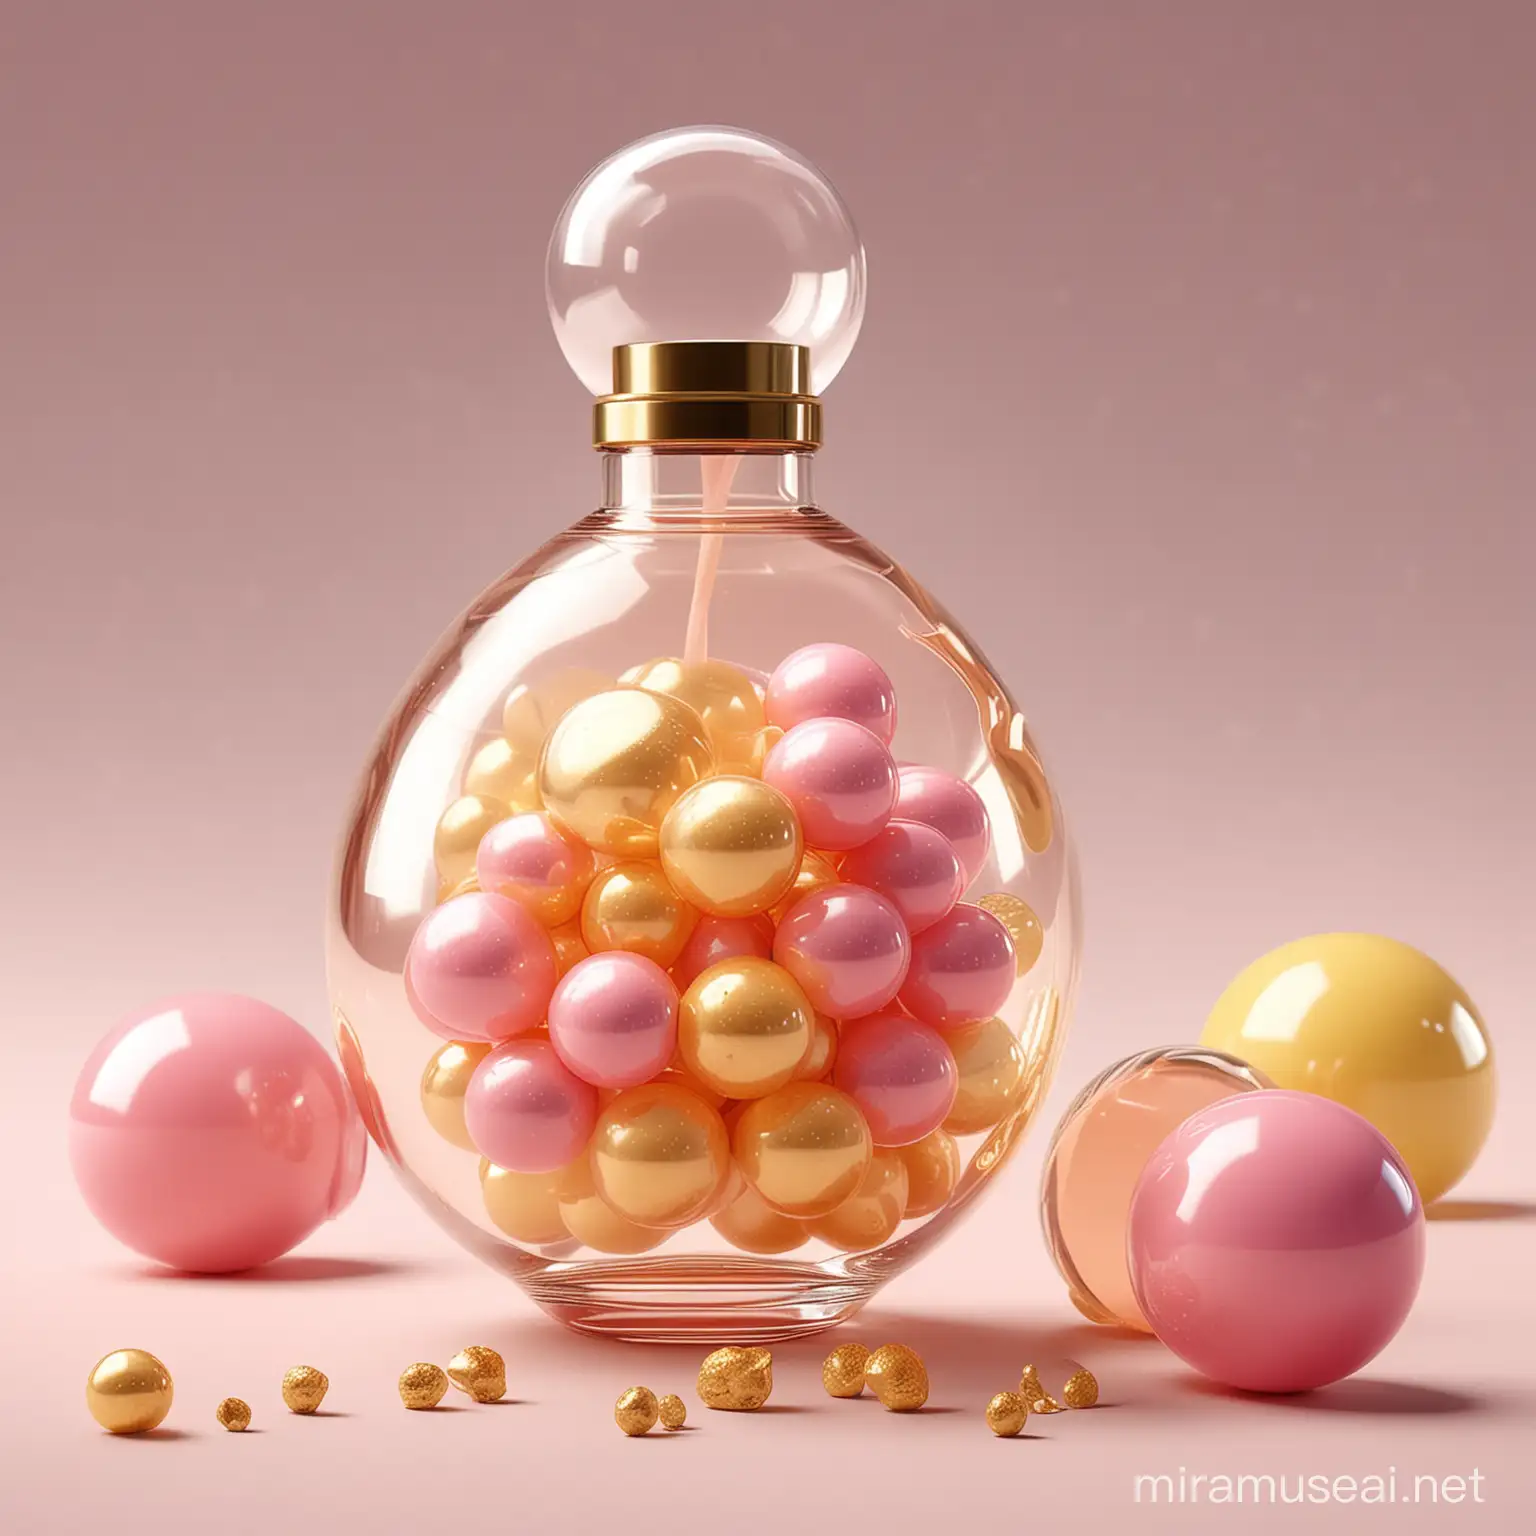 novelty fragrance bottle design with the idea of a bubble or bubble gum candy for colors, elements of gold with clean modern forms